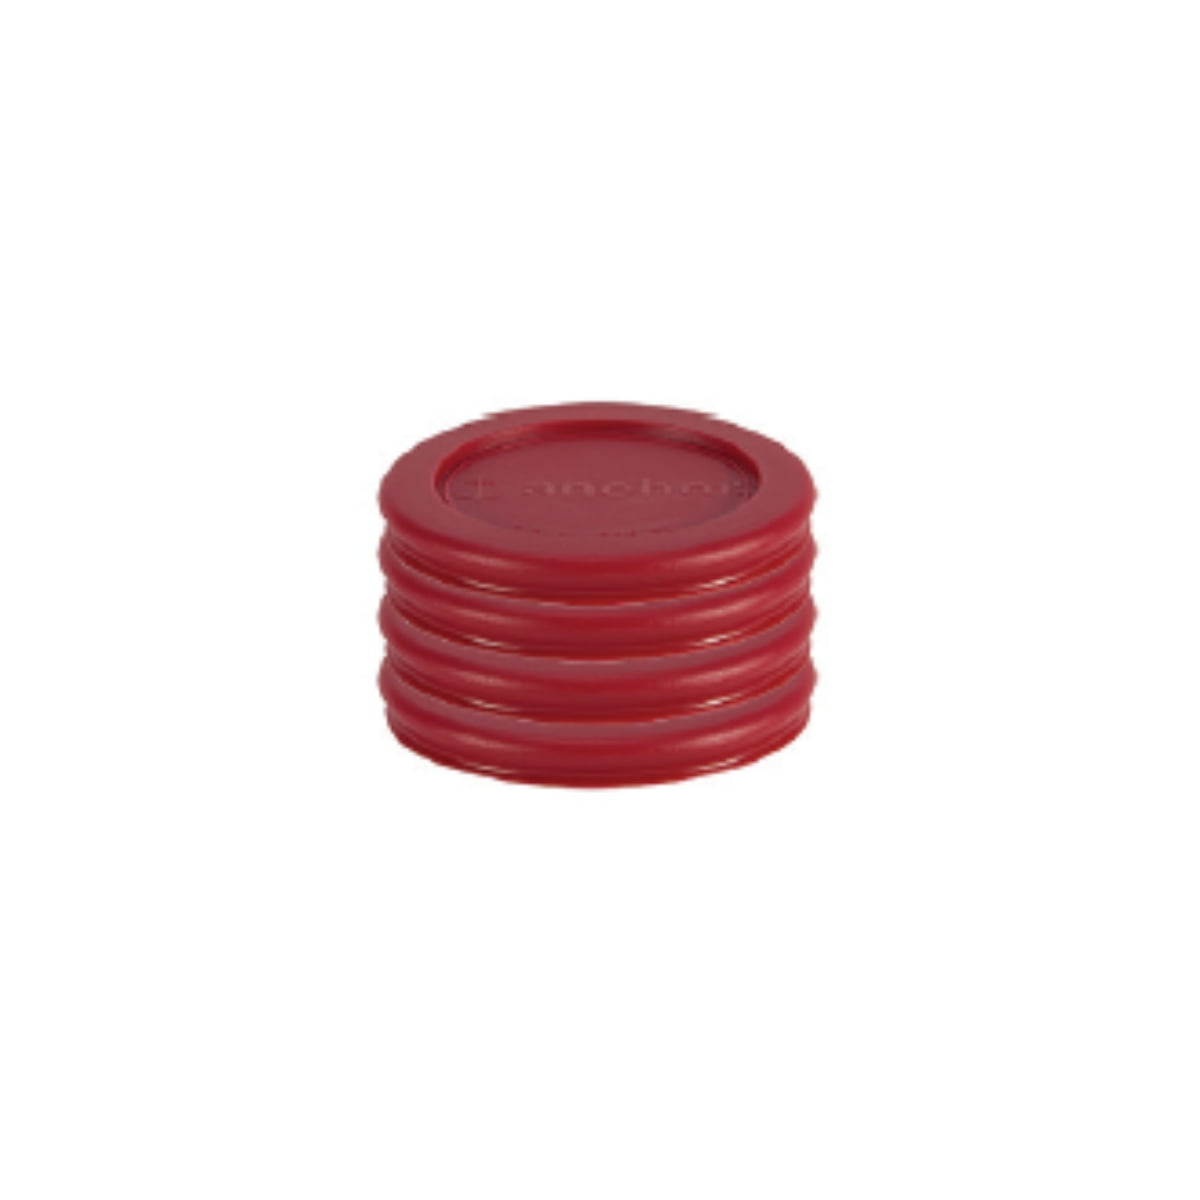 Anchor Hocking 4 X 1 Cup Lids Covers Replacement Red 4pc 1cup for sale online